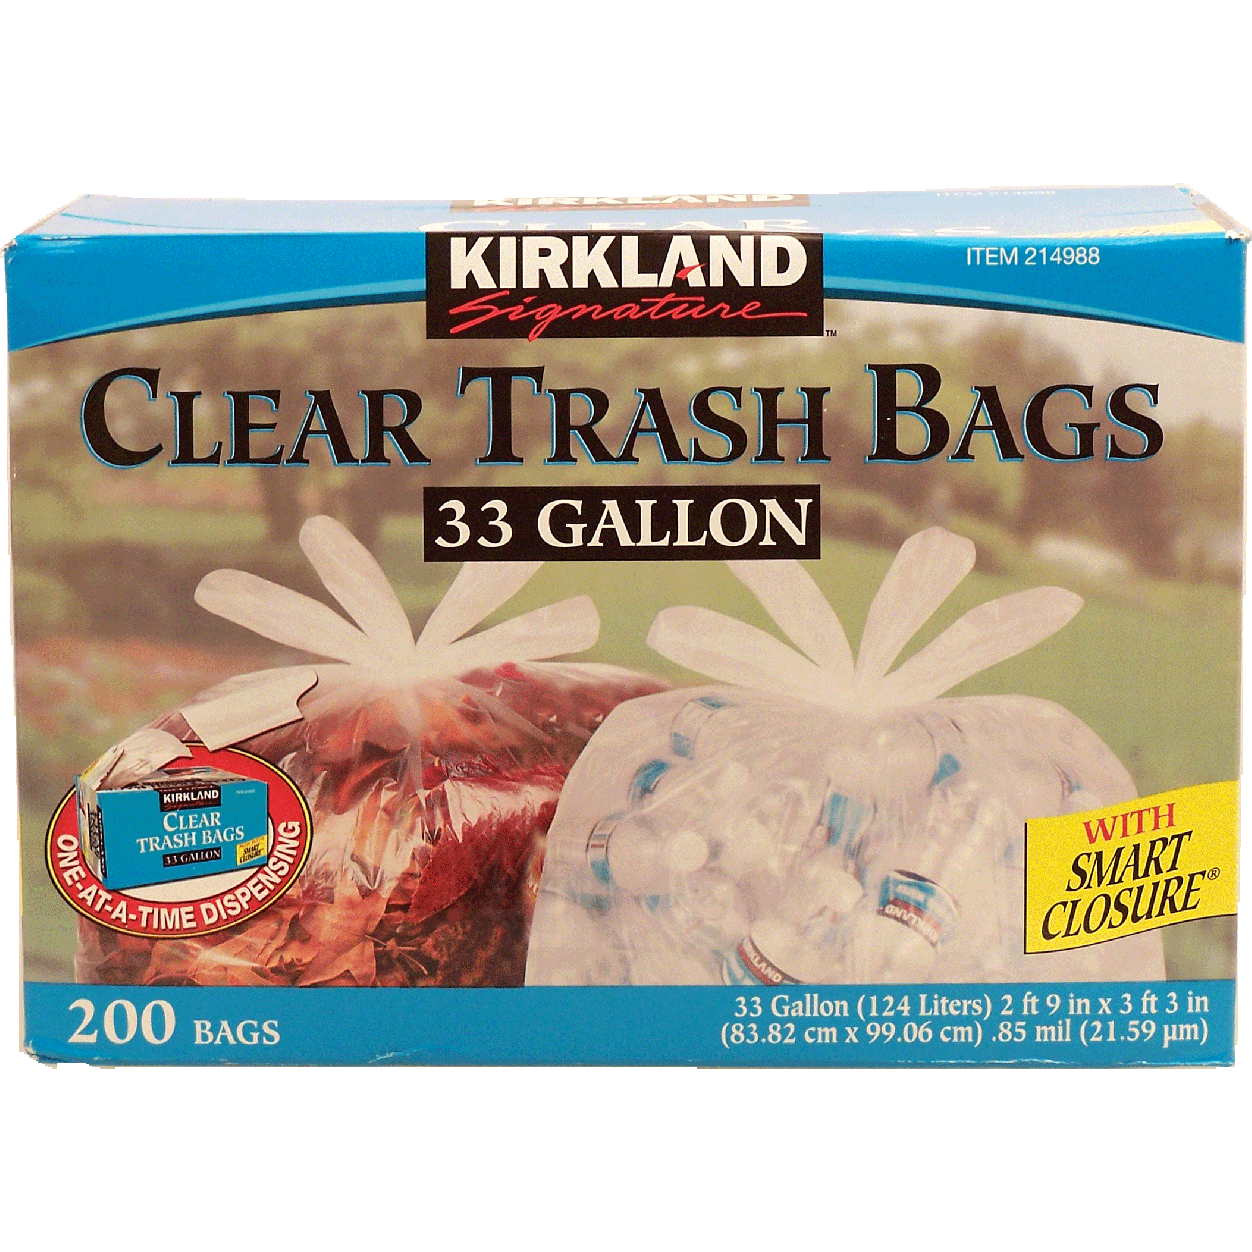 Kirkland Signature clear trash bags with smart closure, 33 gallo200ct